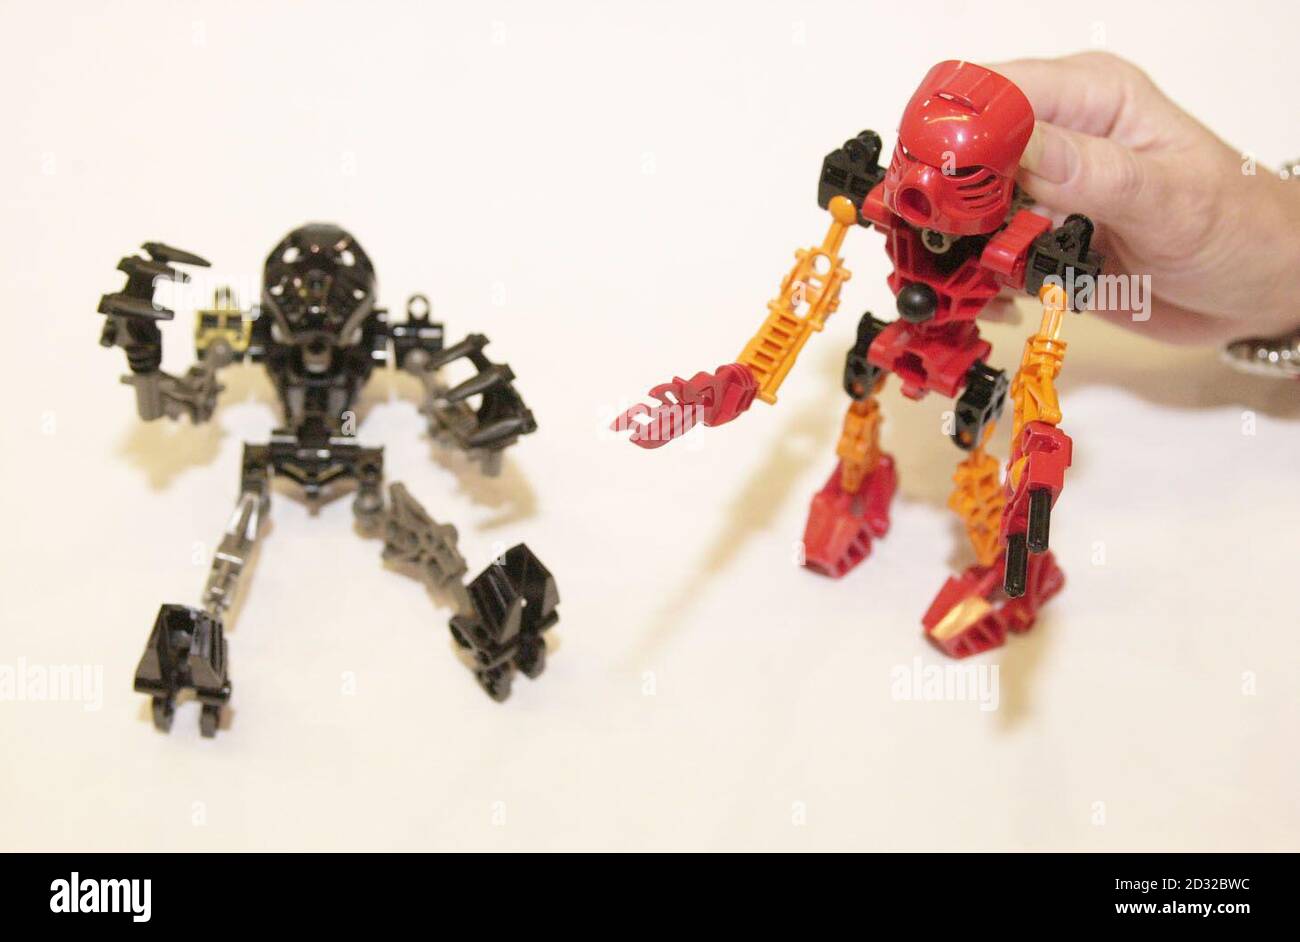 Onua (left) and Tahu, two of LEGO's Bionicles, are displayed at Toy Fair trade show inside ExCel exhibition centre, east London. The LEGO TECHNIC Bionicle has been a consistent best seller throughout the year.  *   and has overcome the hype of Harry Potter to win the British Association of Toy Retailers' Toy of the Year 2001-2002. Stock Photo